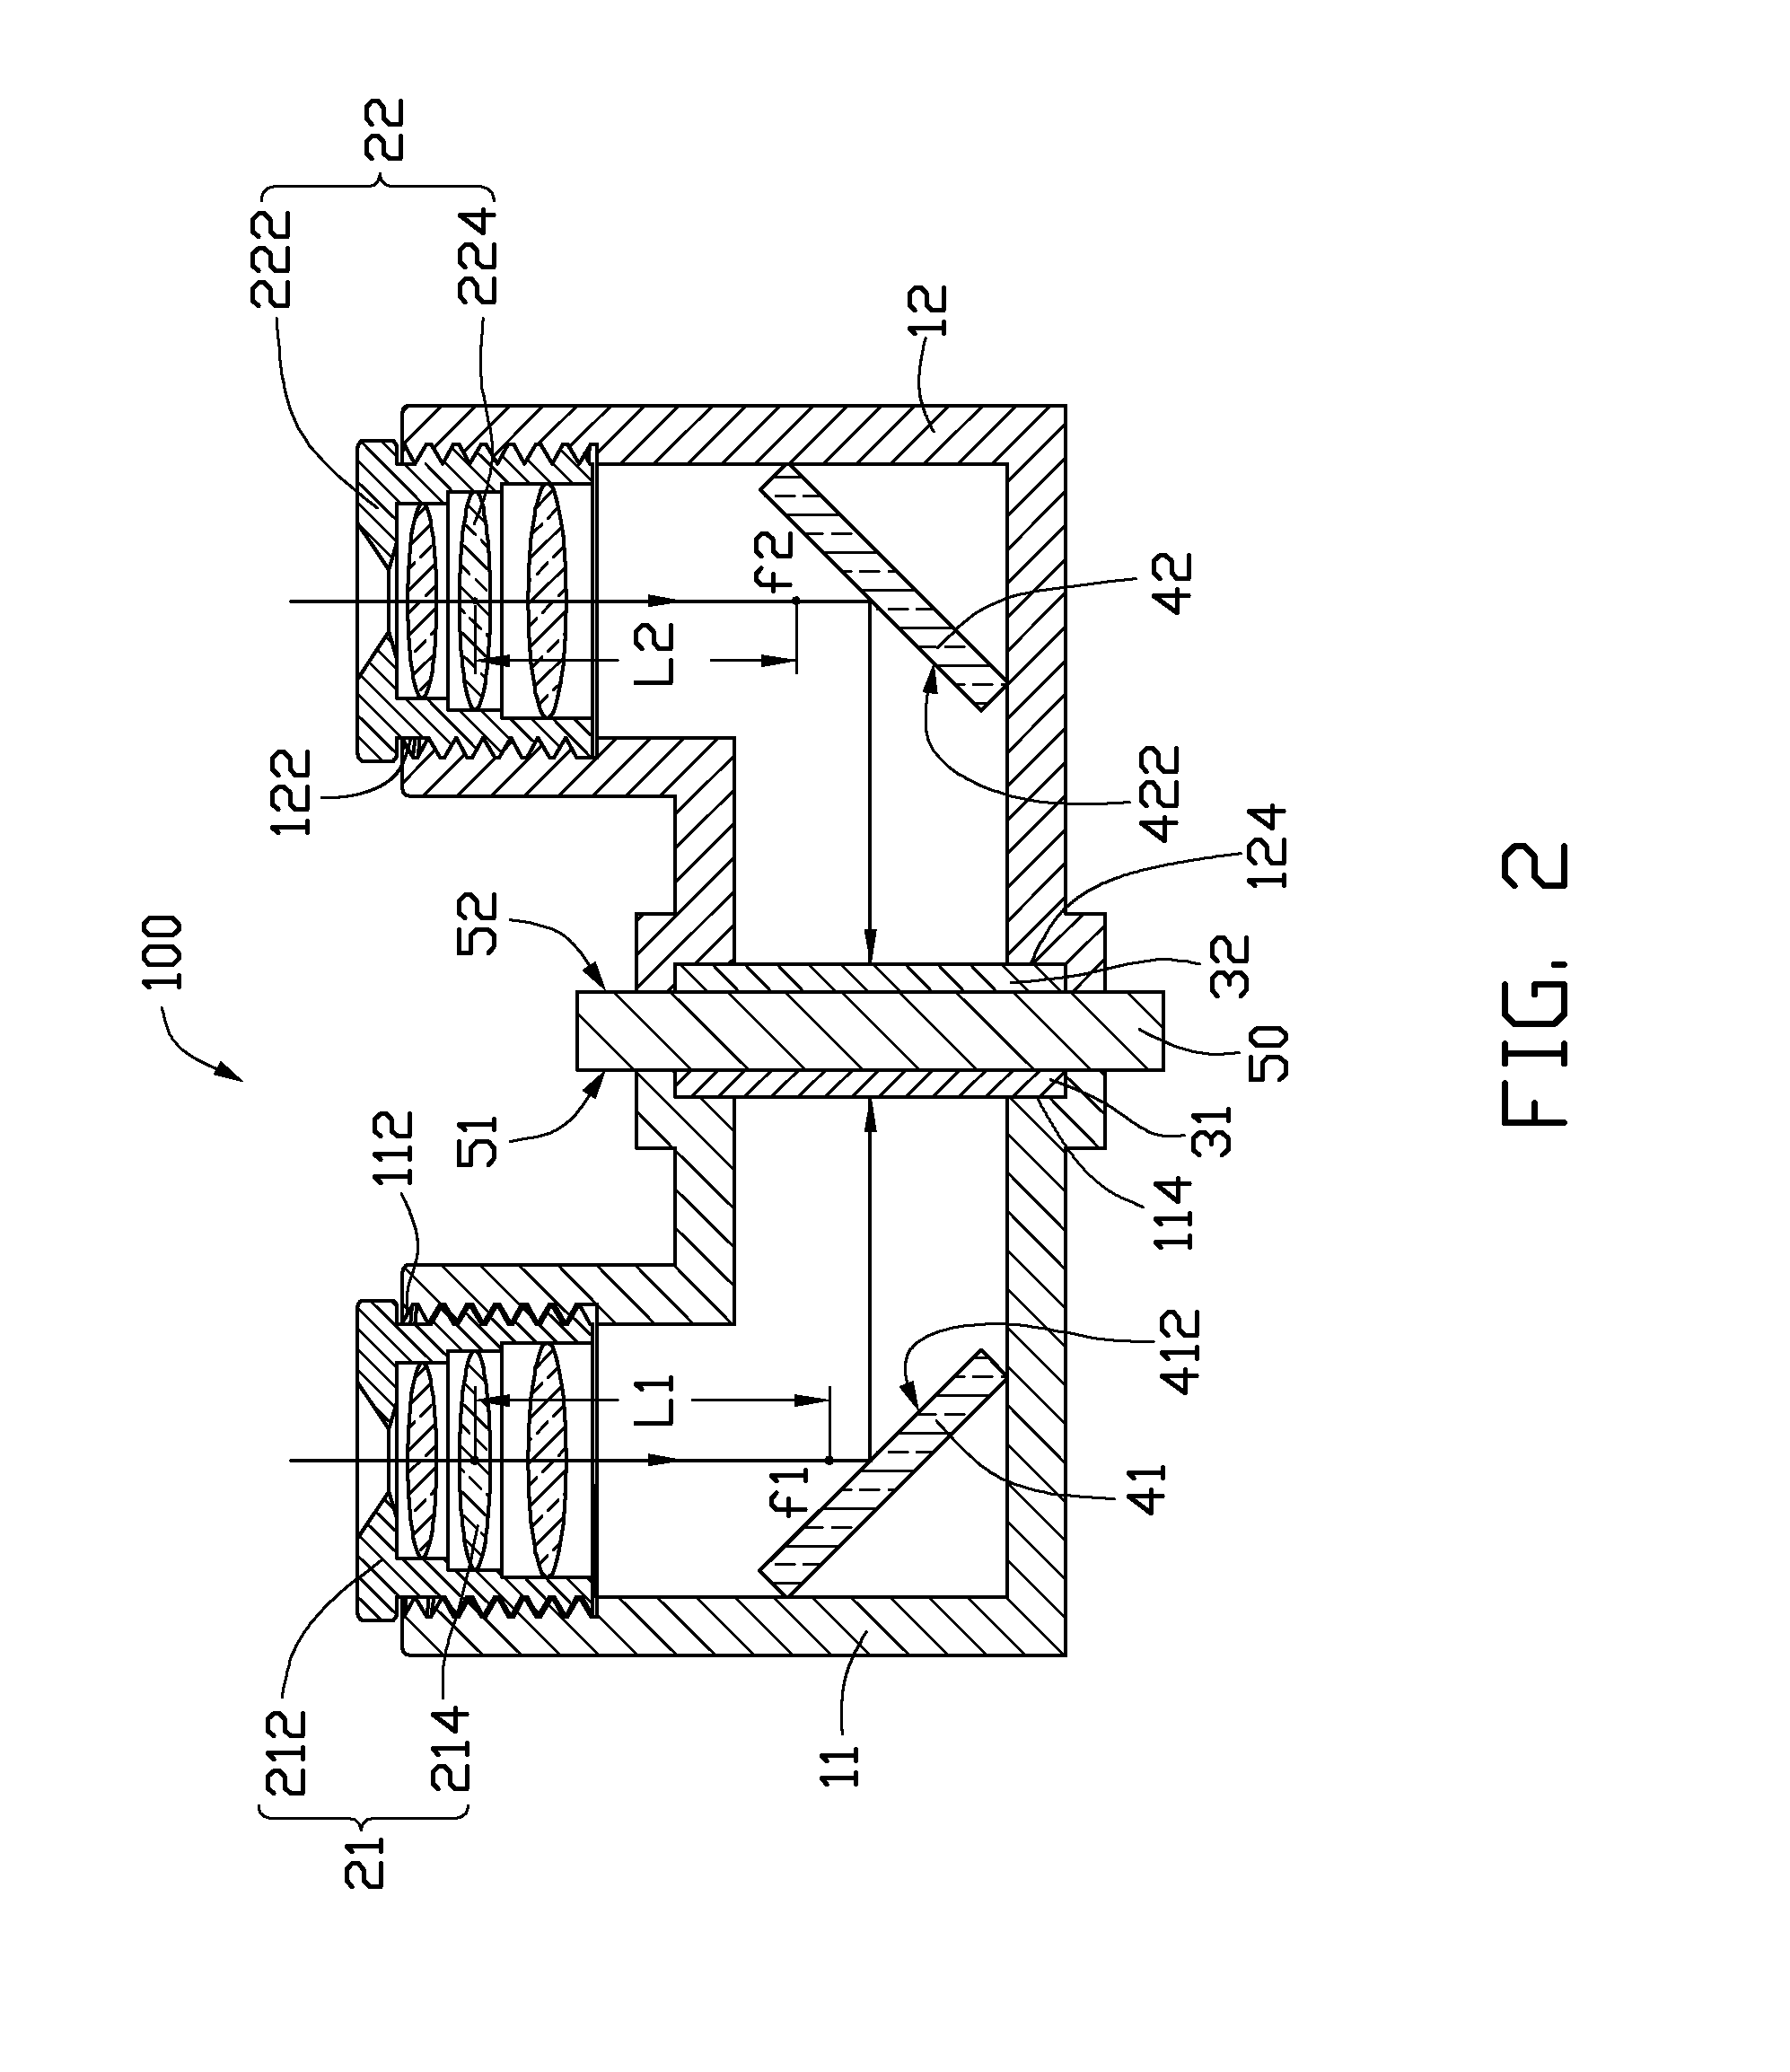 Camera module with dual lens modules and image sensors